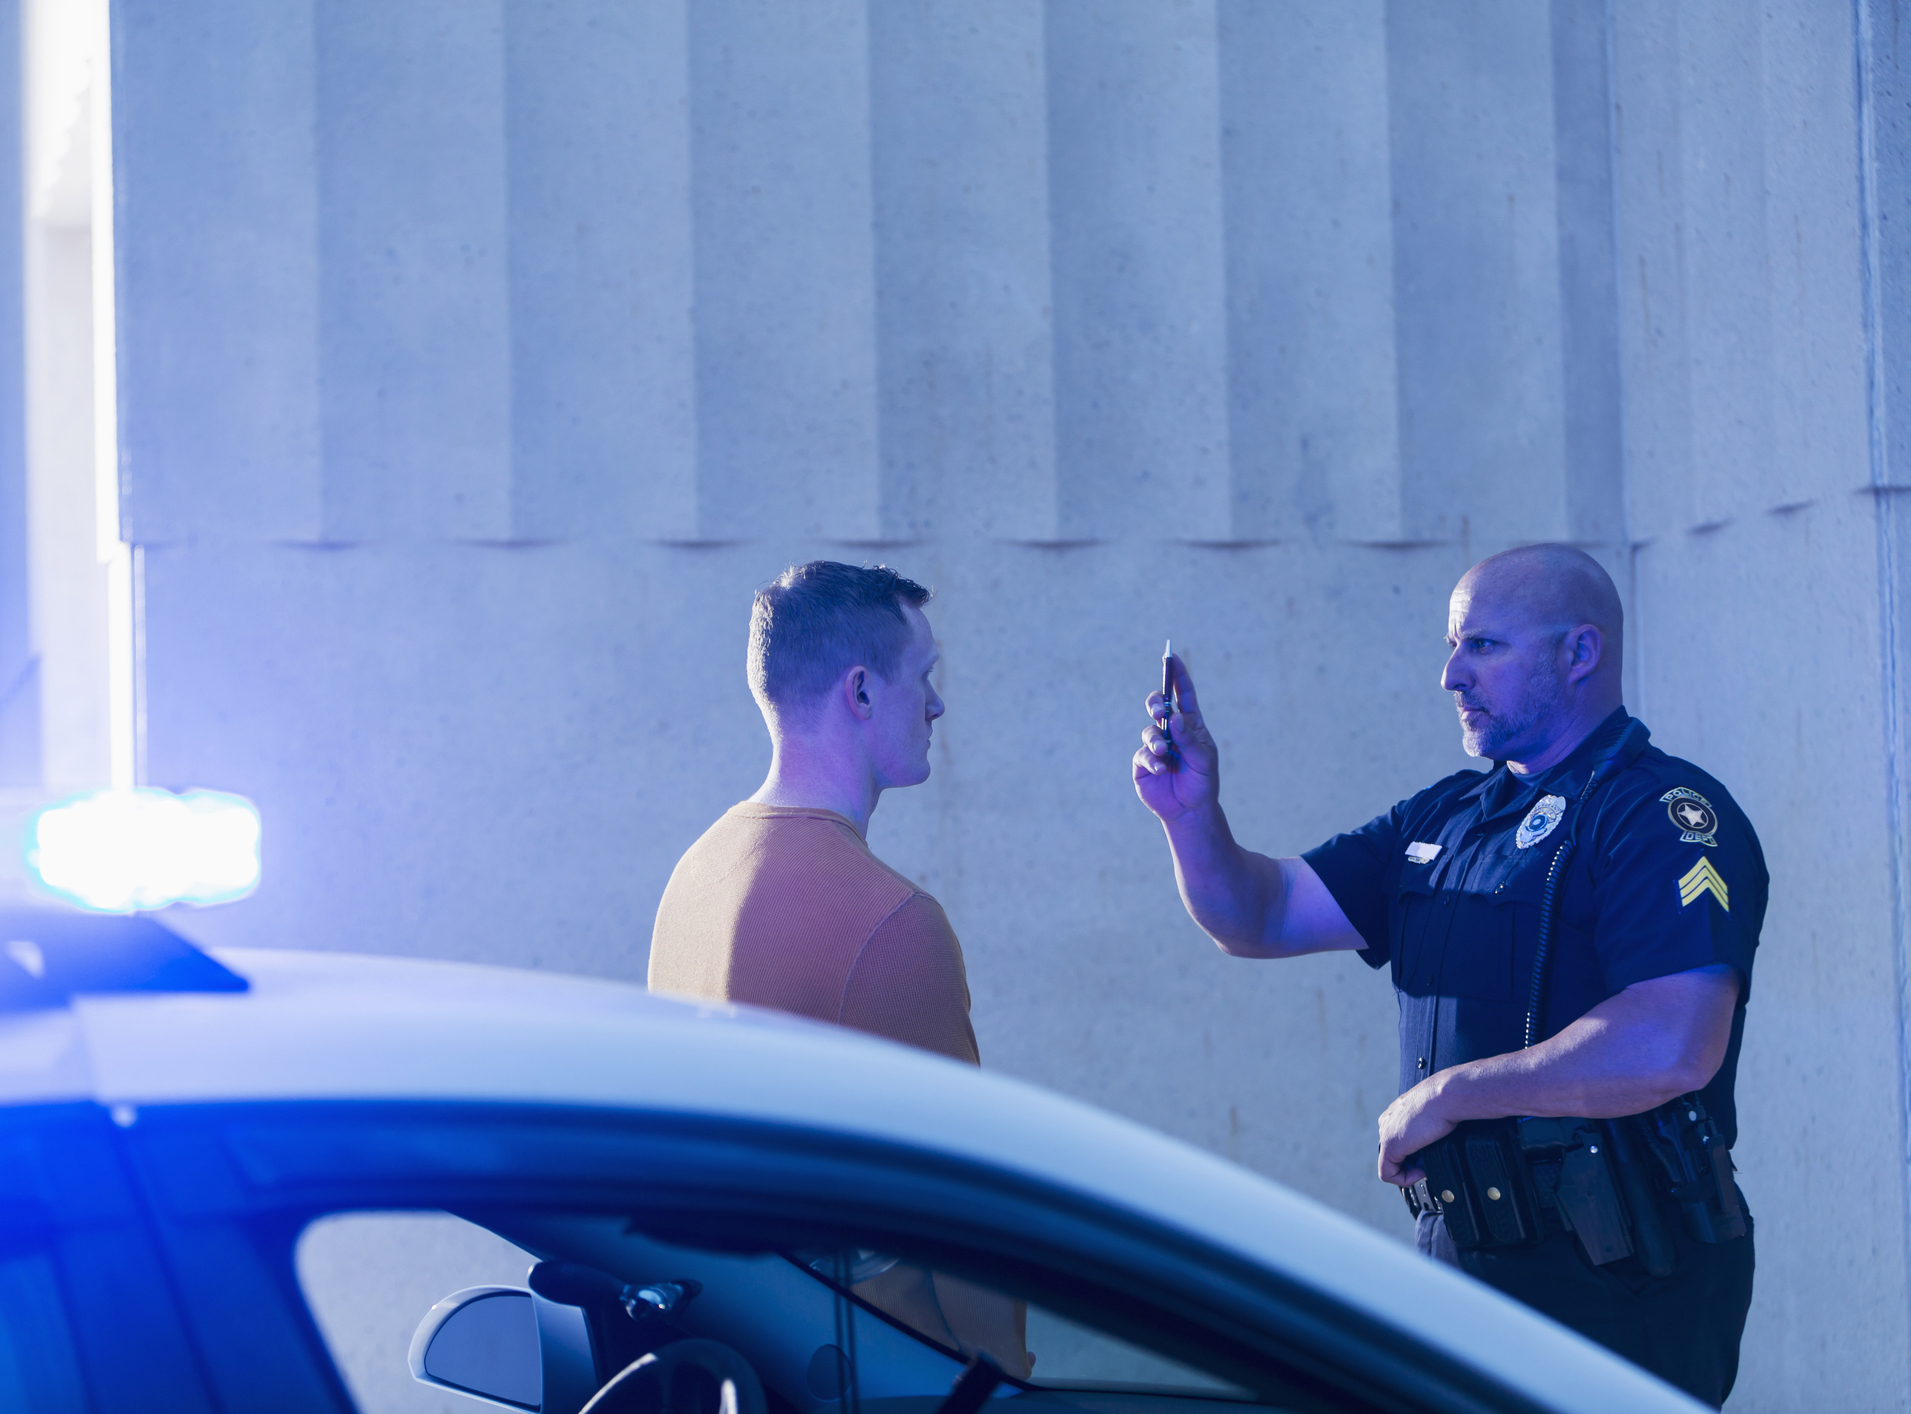 Police officer giving sobriety test to young man, with a police cruiser in the foreground, photo by kali9/Getty Images